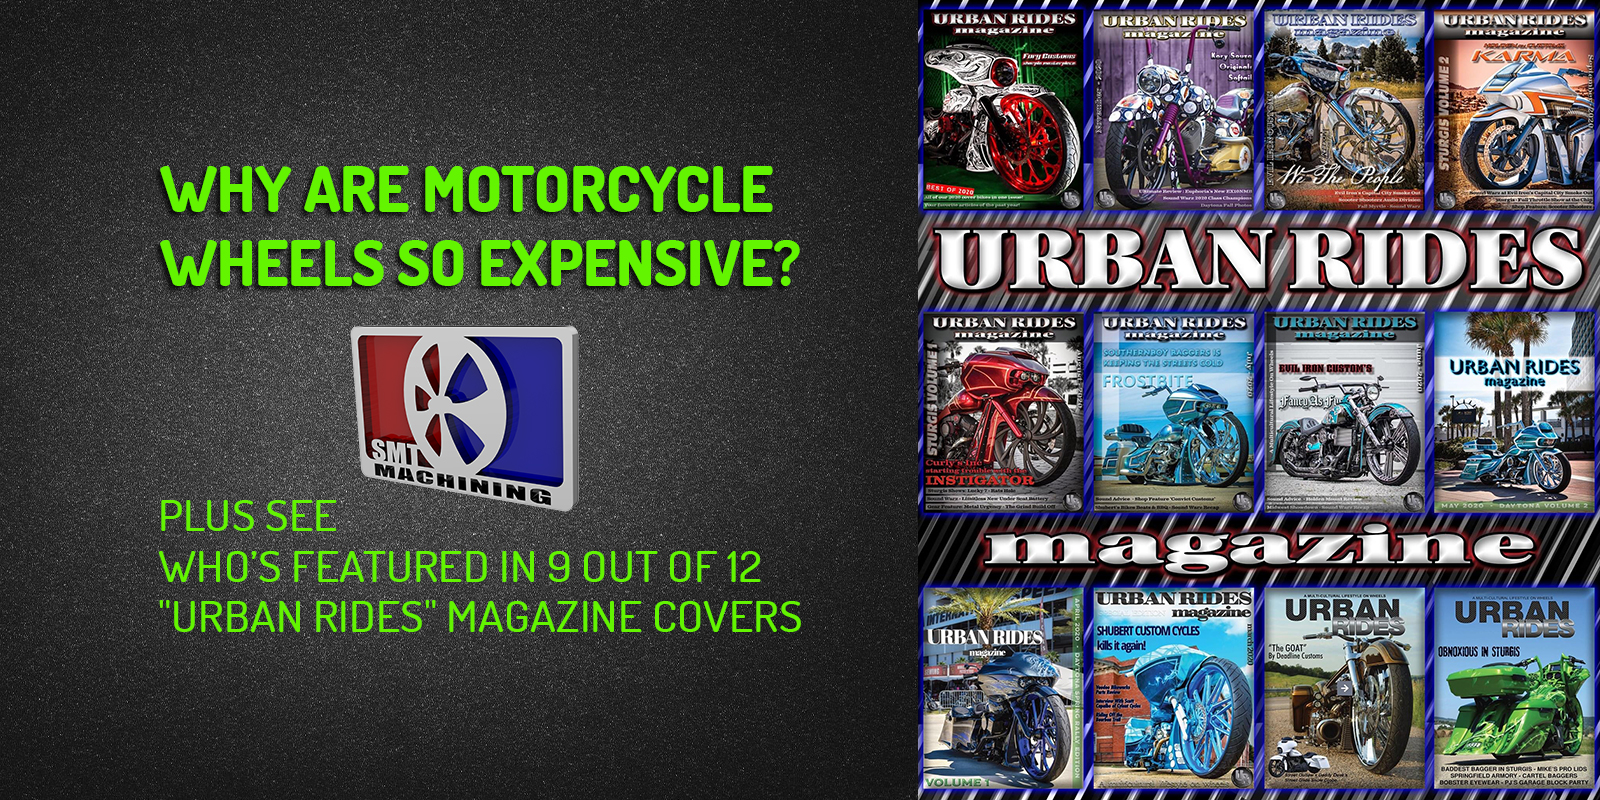 Why Are Motorcycle Wheels So Expensive?